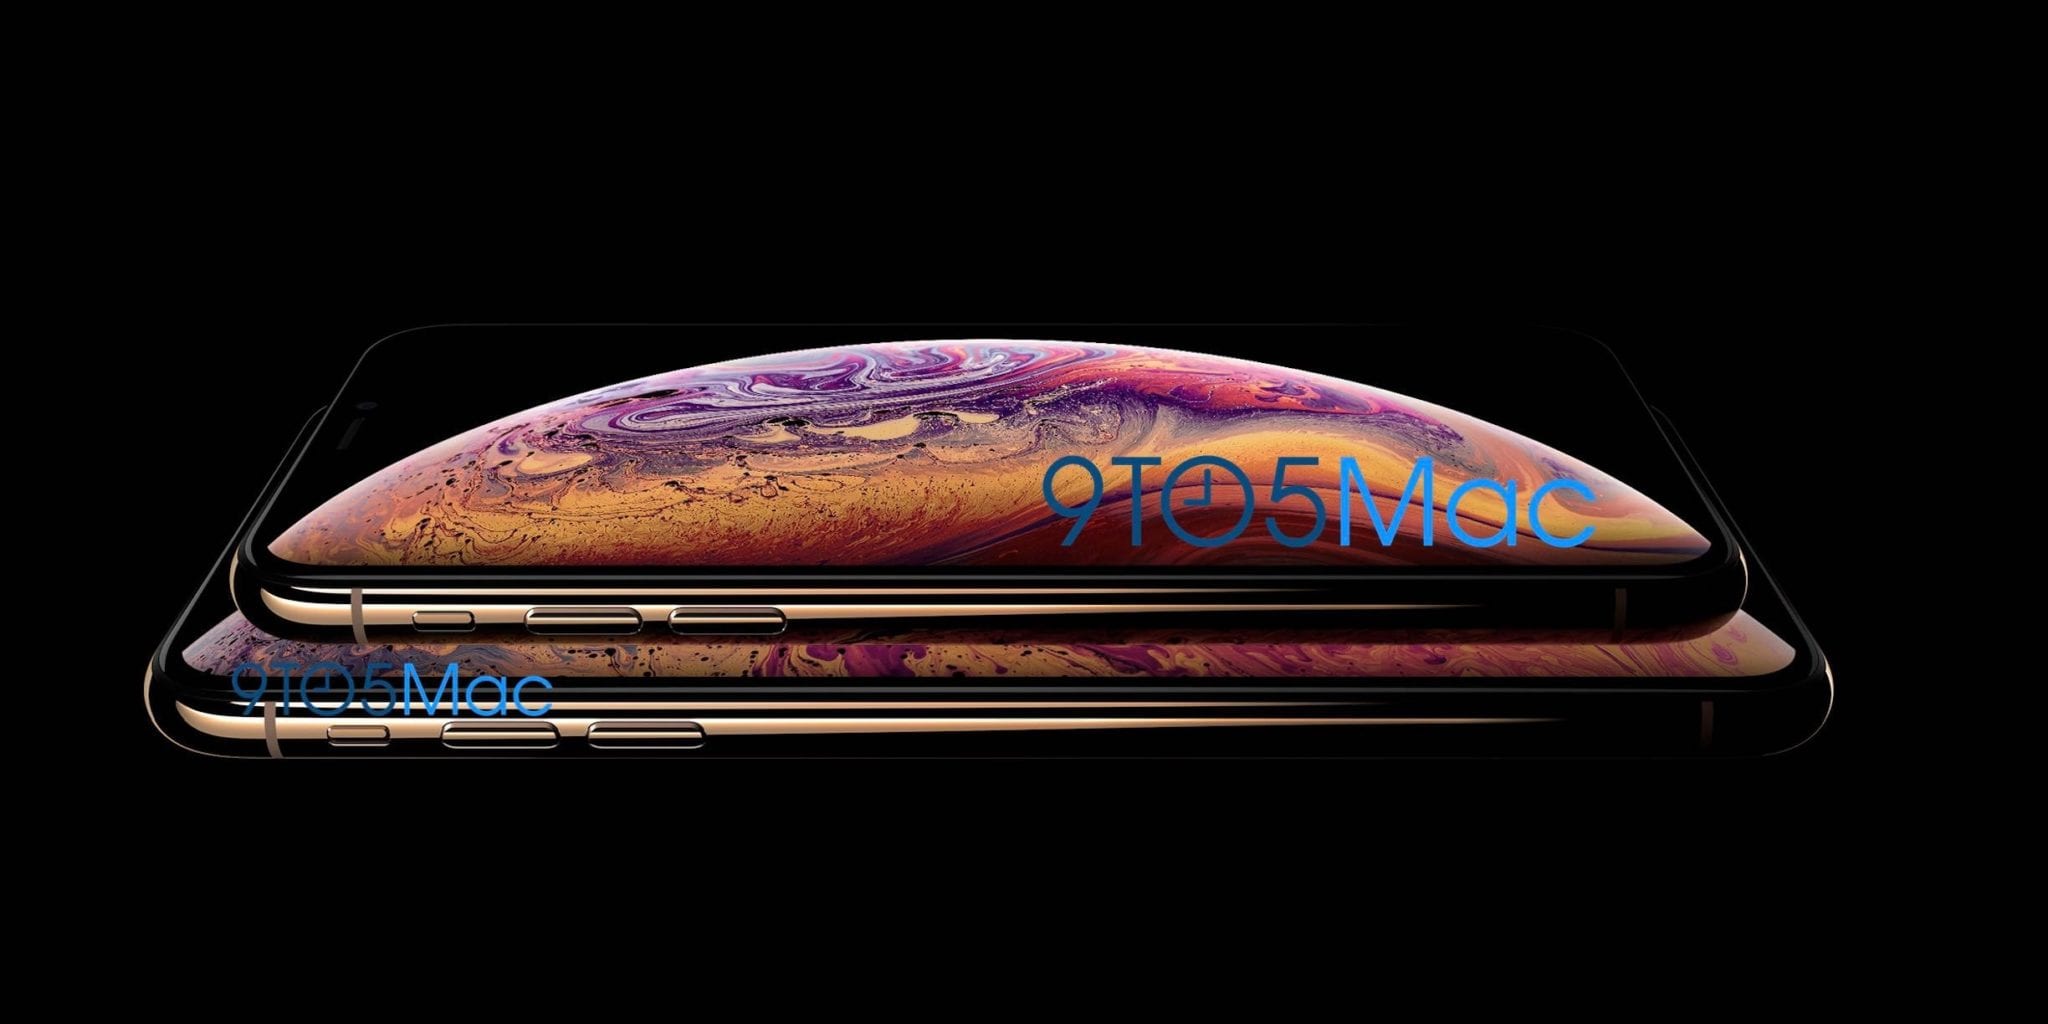 iPhone XS leaked image from Apple (Source: 9to5Mac)